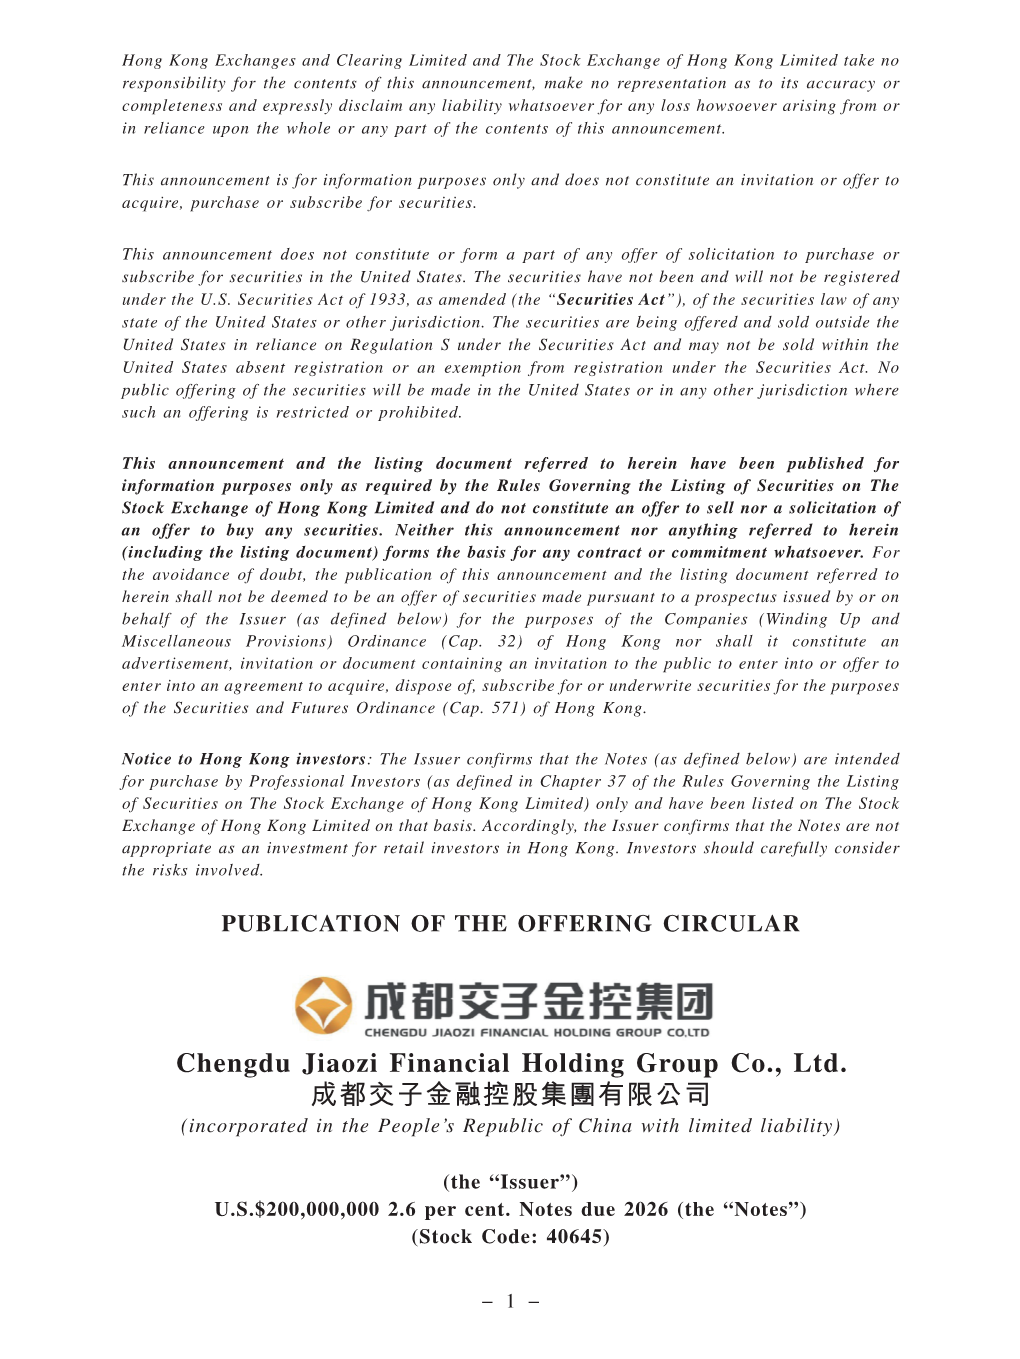 Chengdu Jiaozi Financial Holding Group Co., Ltd. 成都交子金融控股集團有限公司 (Incorporated in the People’S Republic of China with Limited Liability)